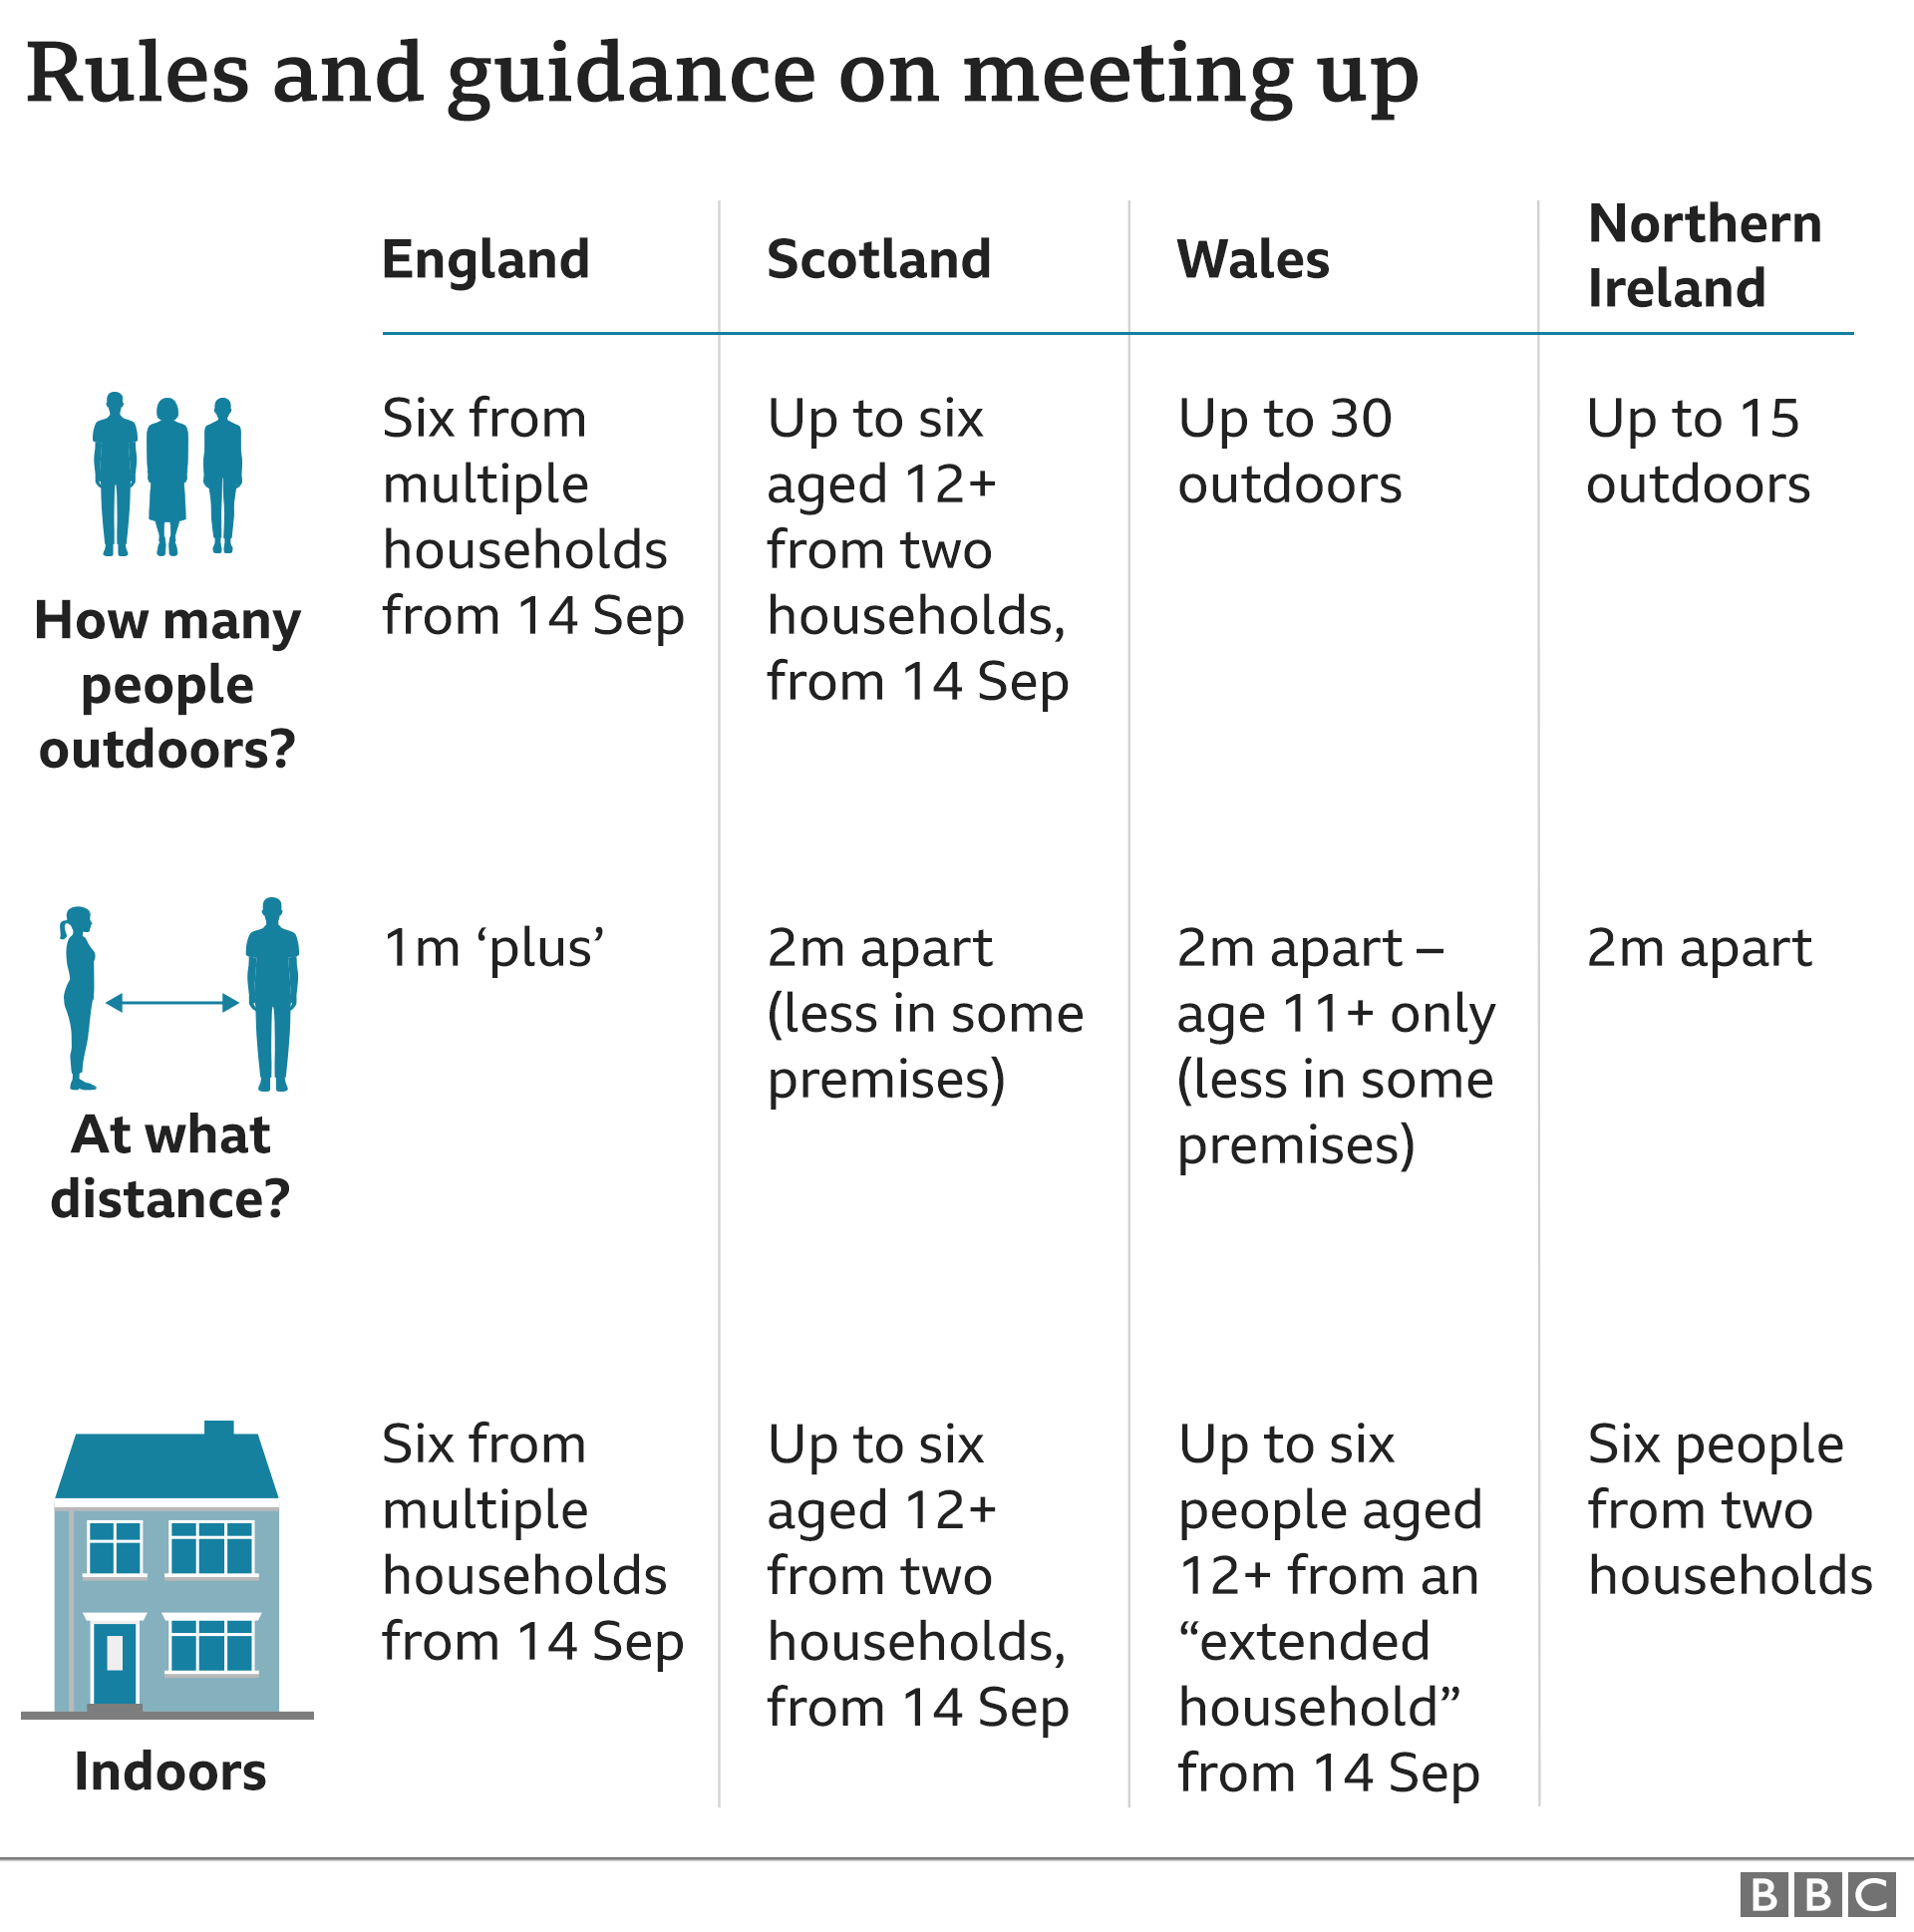 Rules and guidance meeting up - 11 Sept